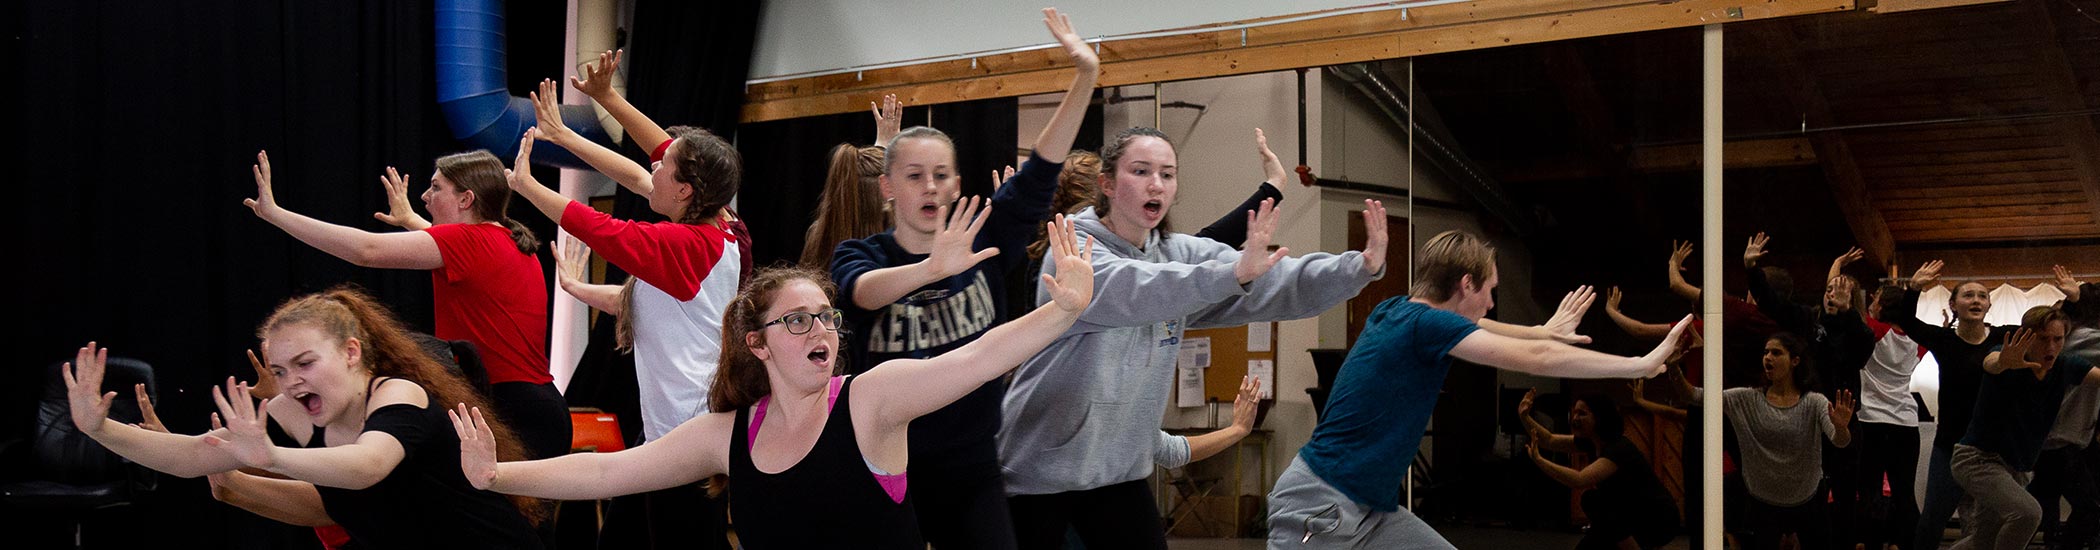 Photo of students rehearsing in a studio. They are in mid-movement, with their mouths open singing.